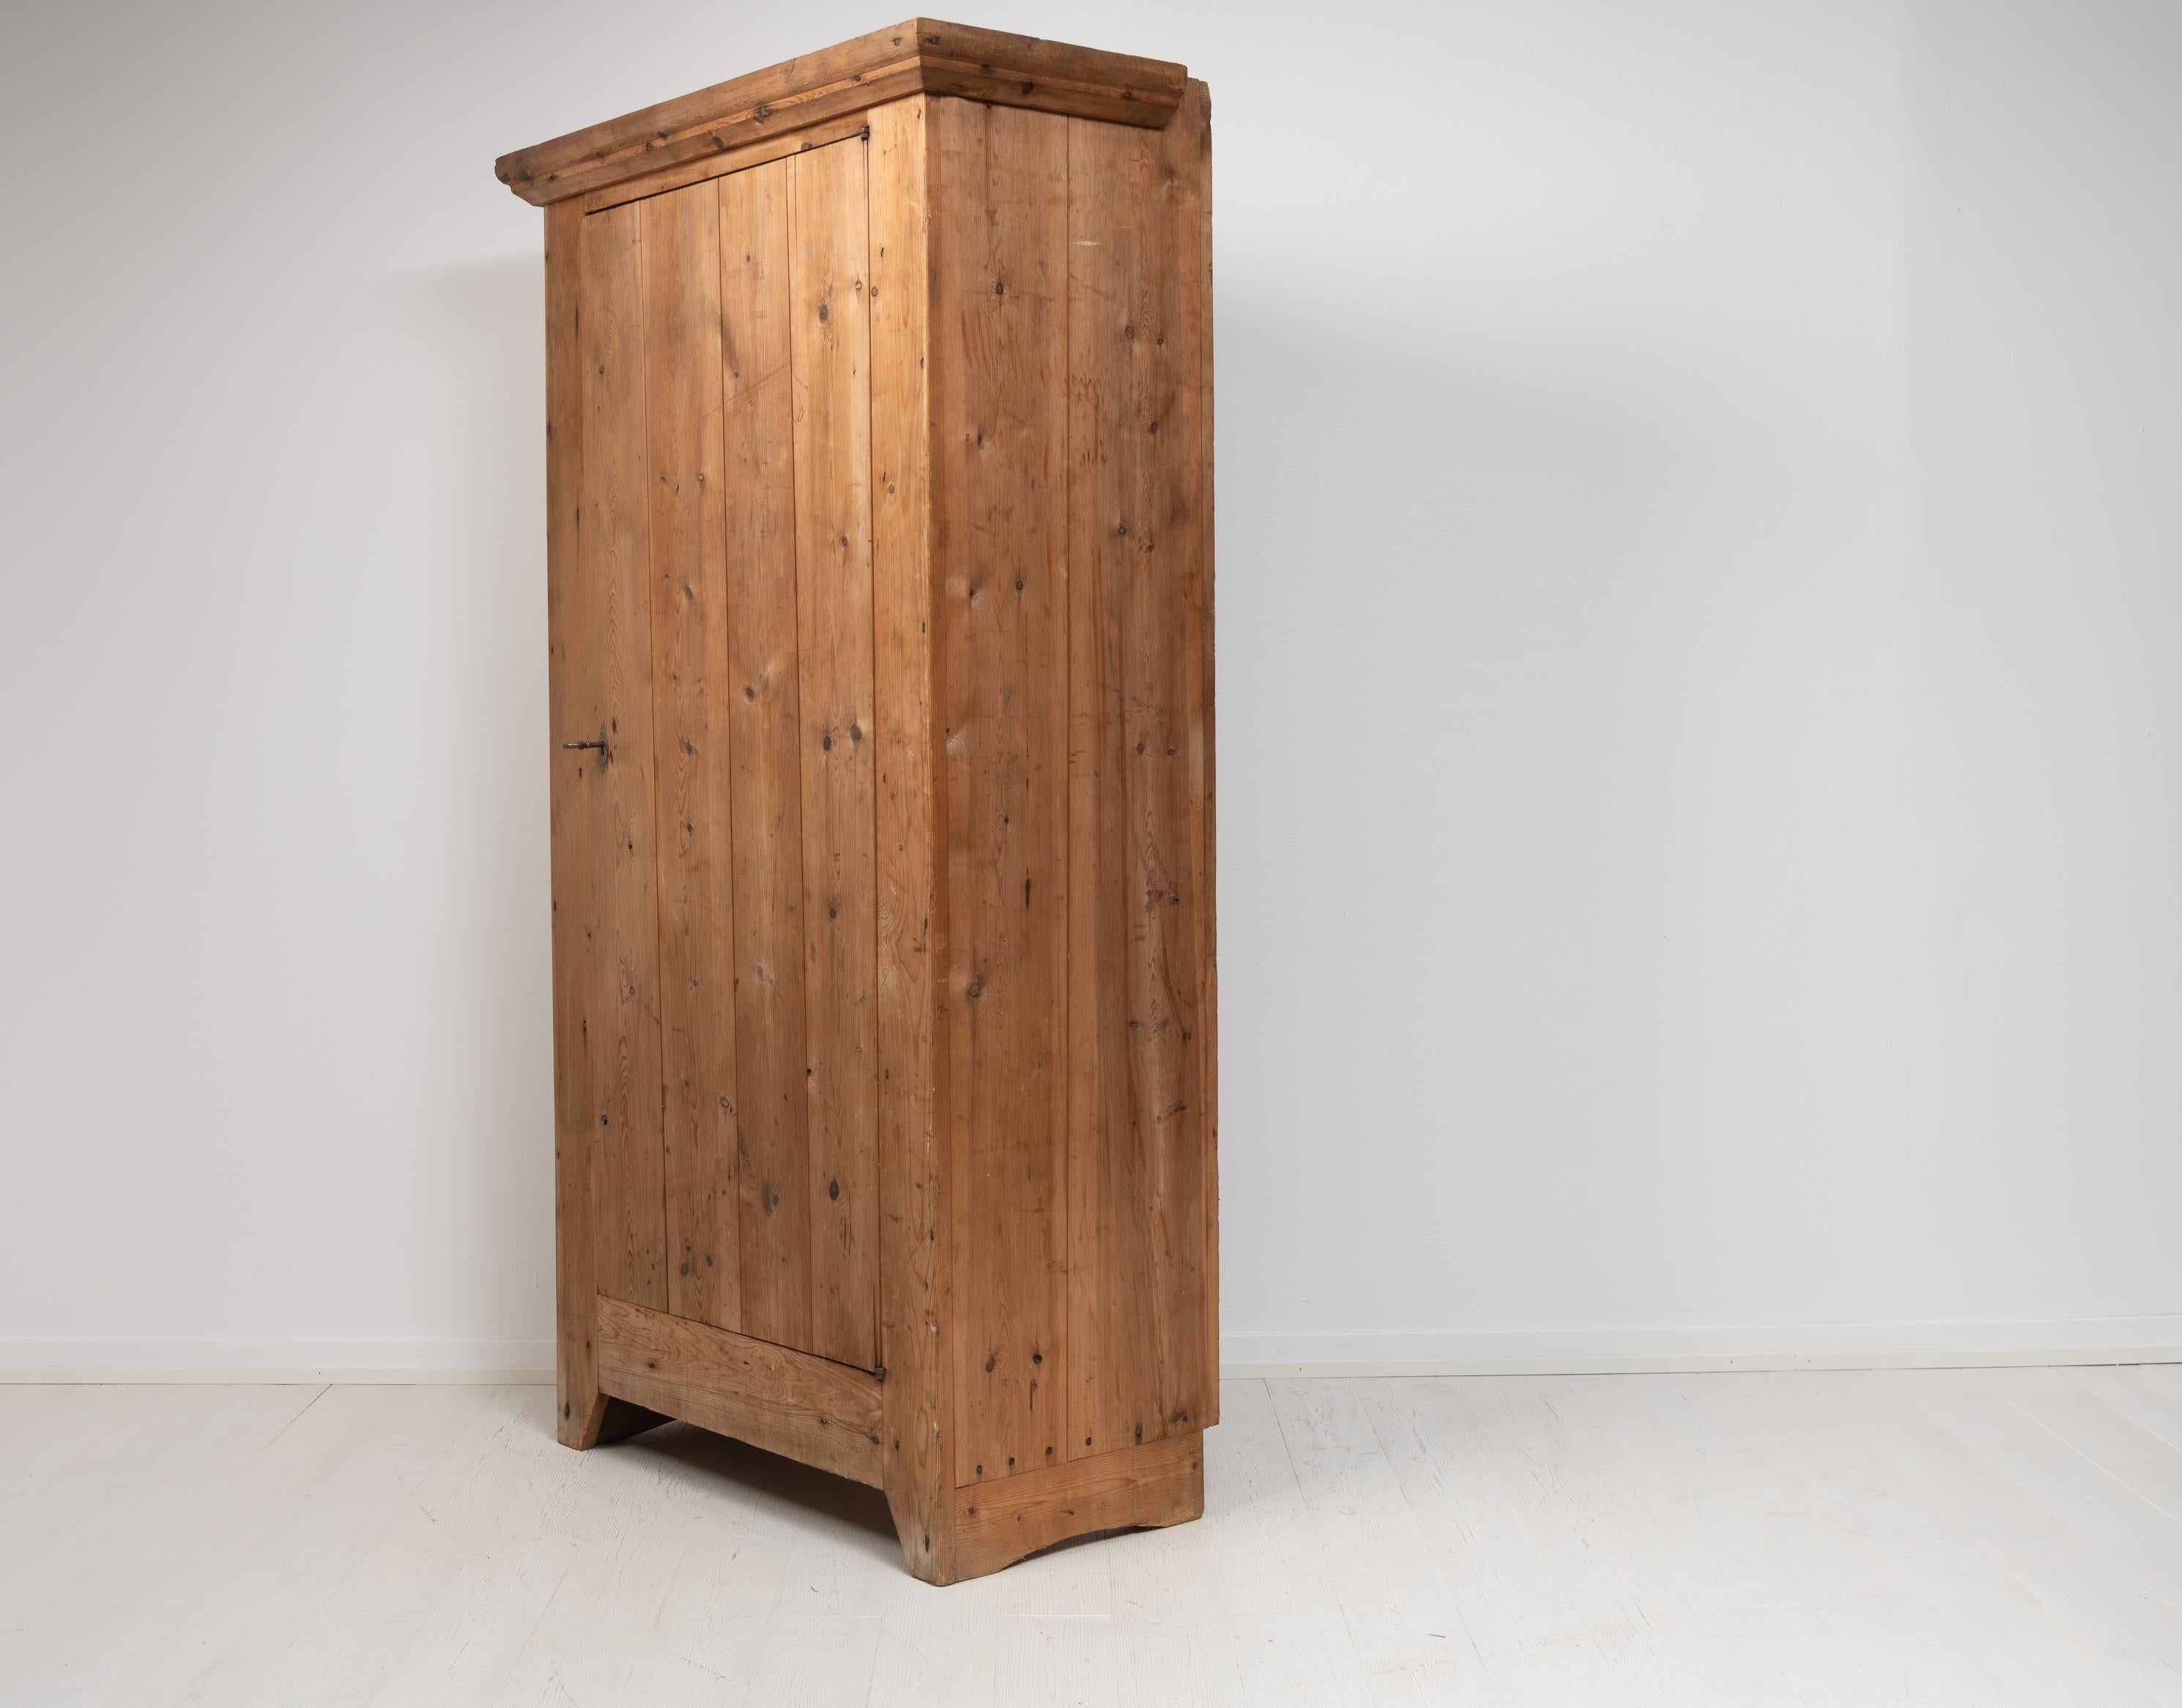 Unusual 19th Century Swedish Hand-Made Pine Cabinet In Good Condition For Sale In Kramfors, SE